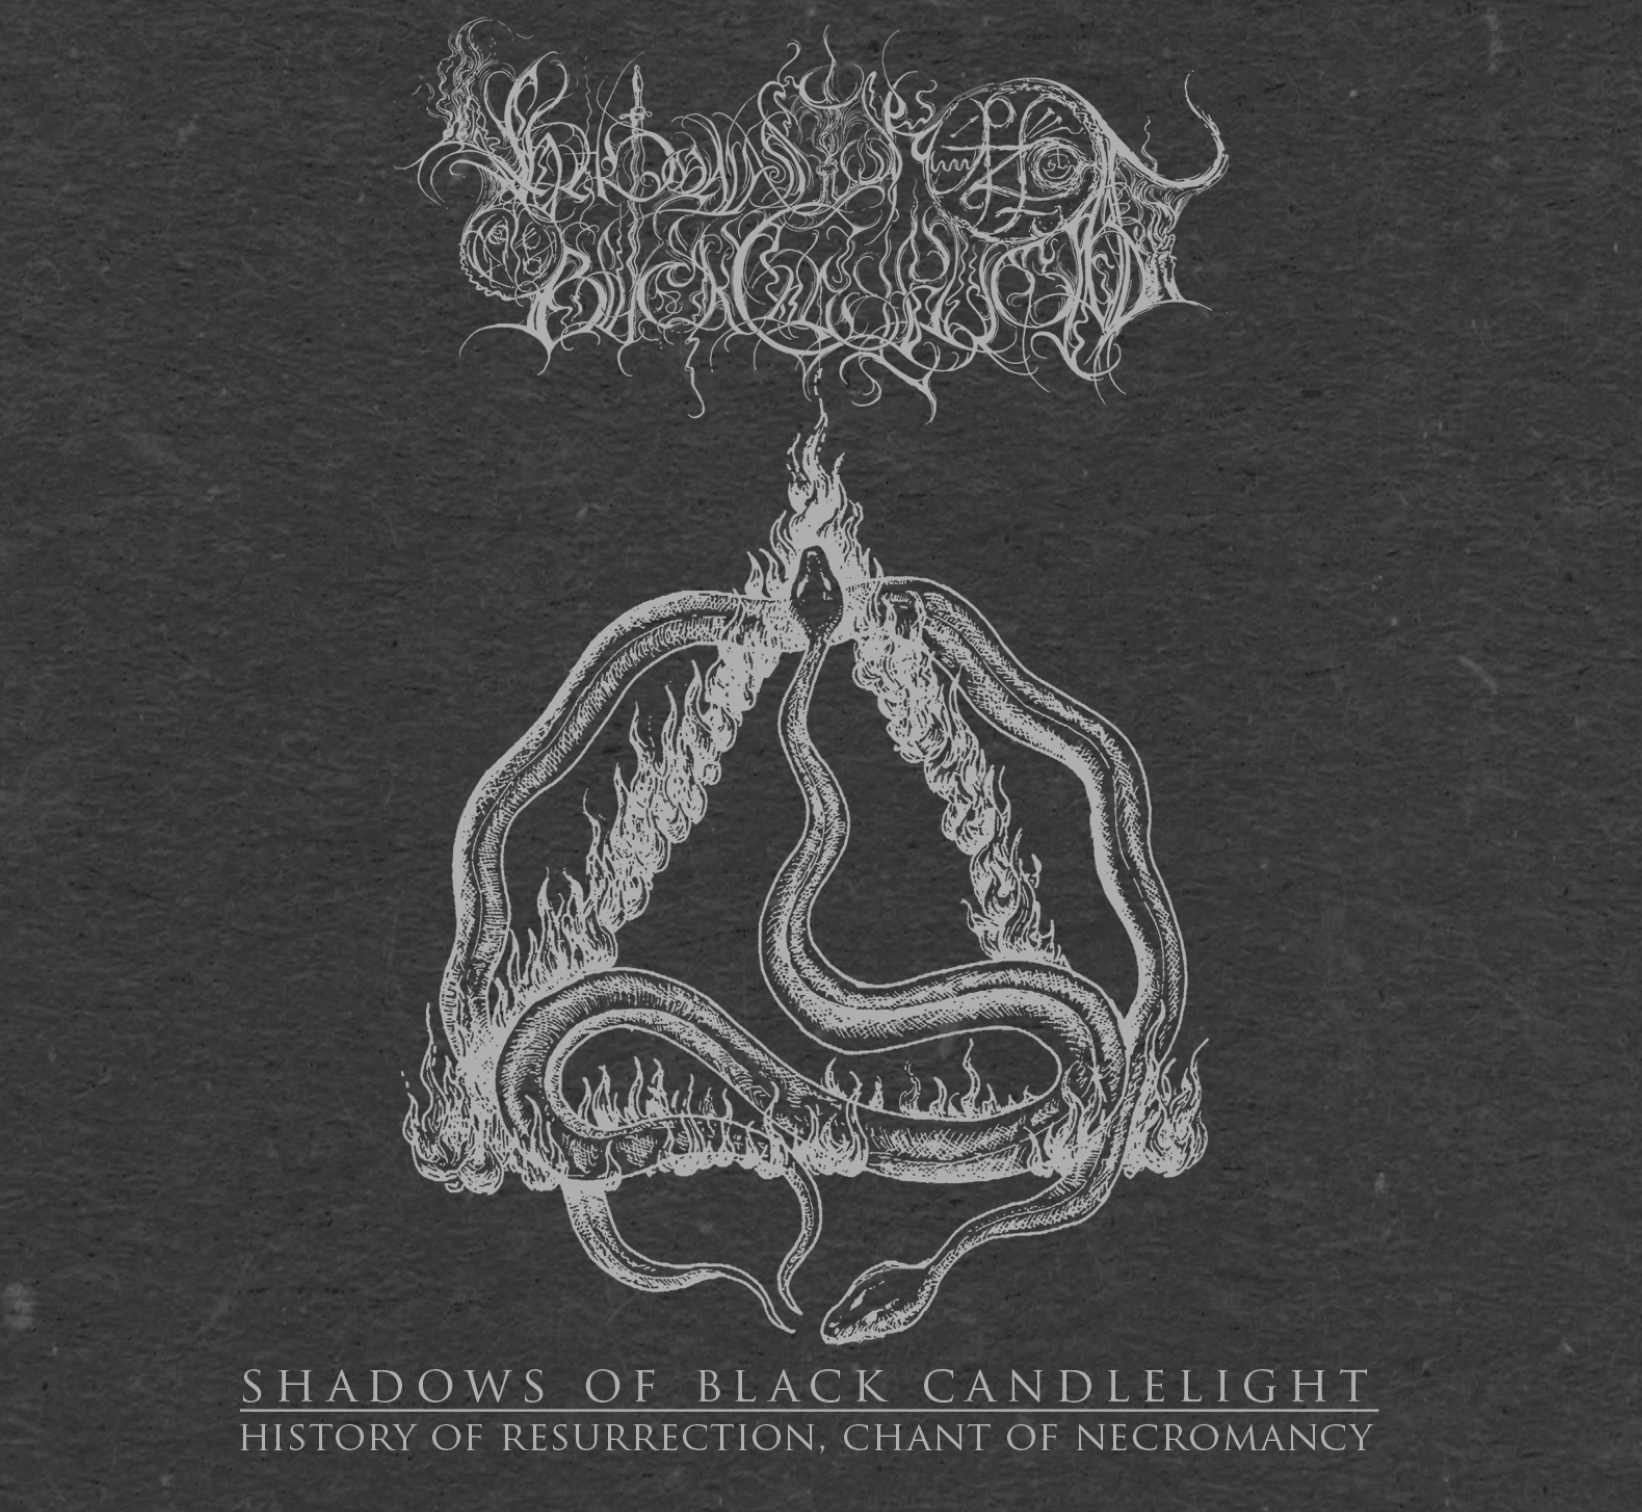 Shadows Of Black Candlelight - History Of Resurrection, Chant Of Necromancy CD Digipack